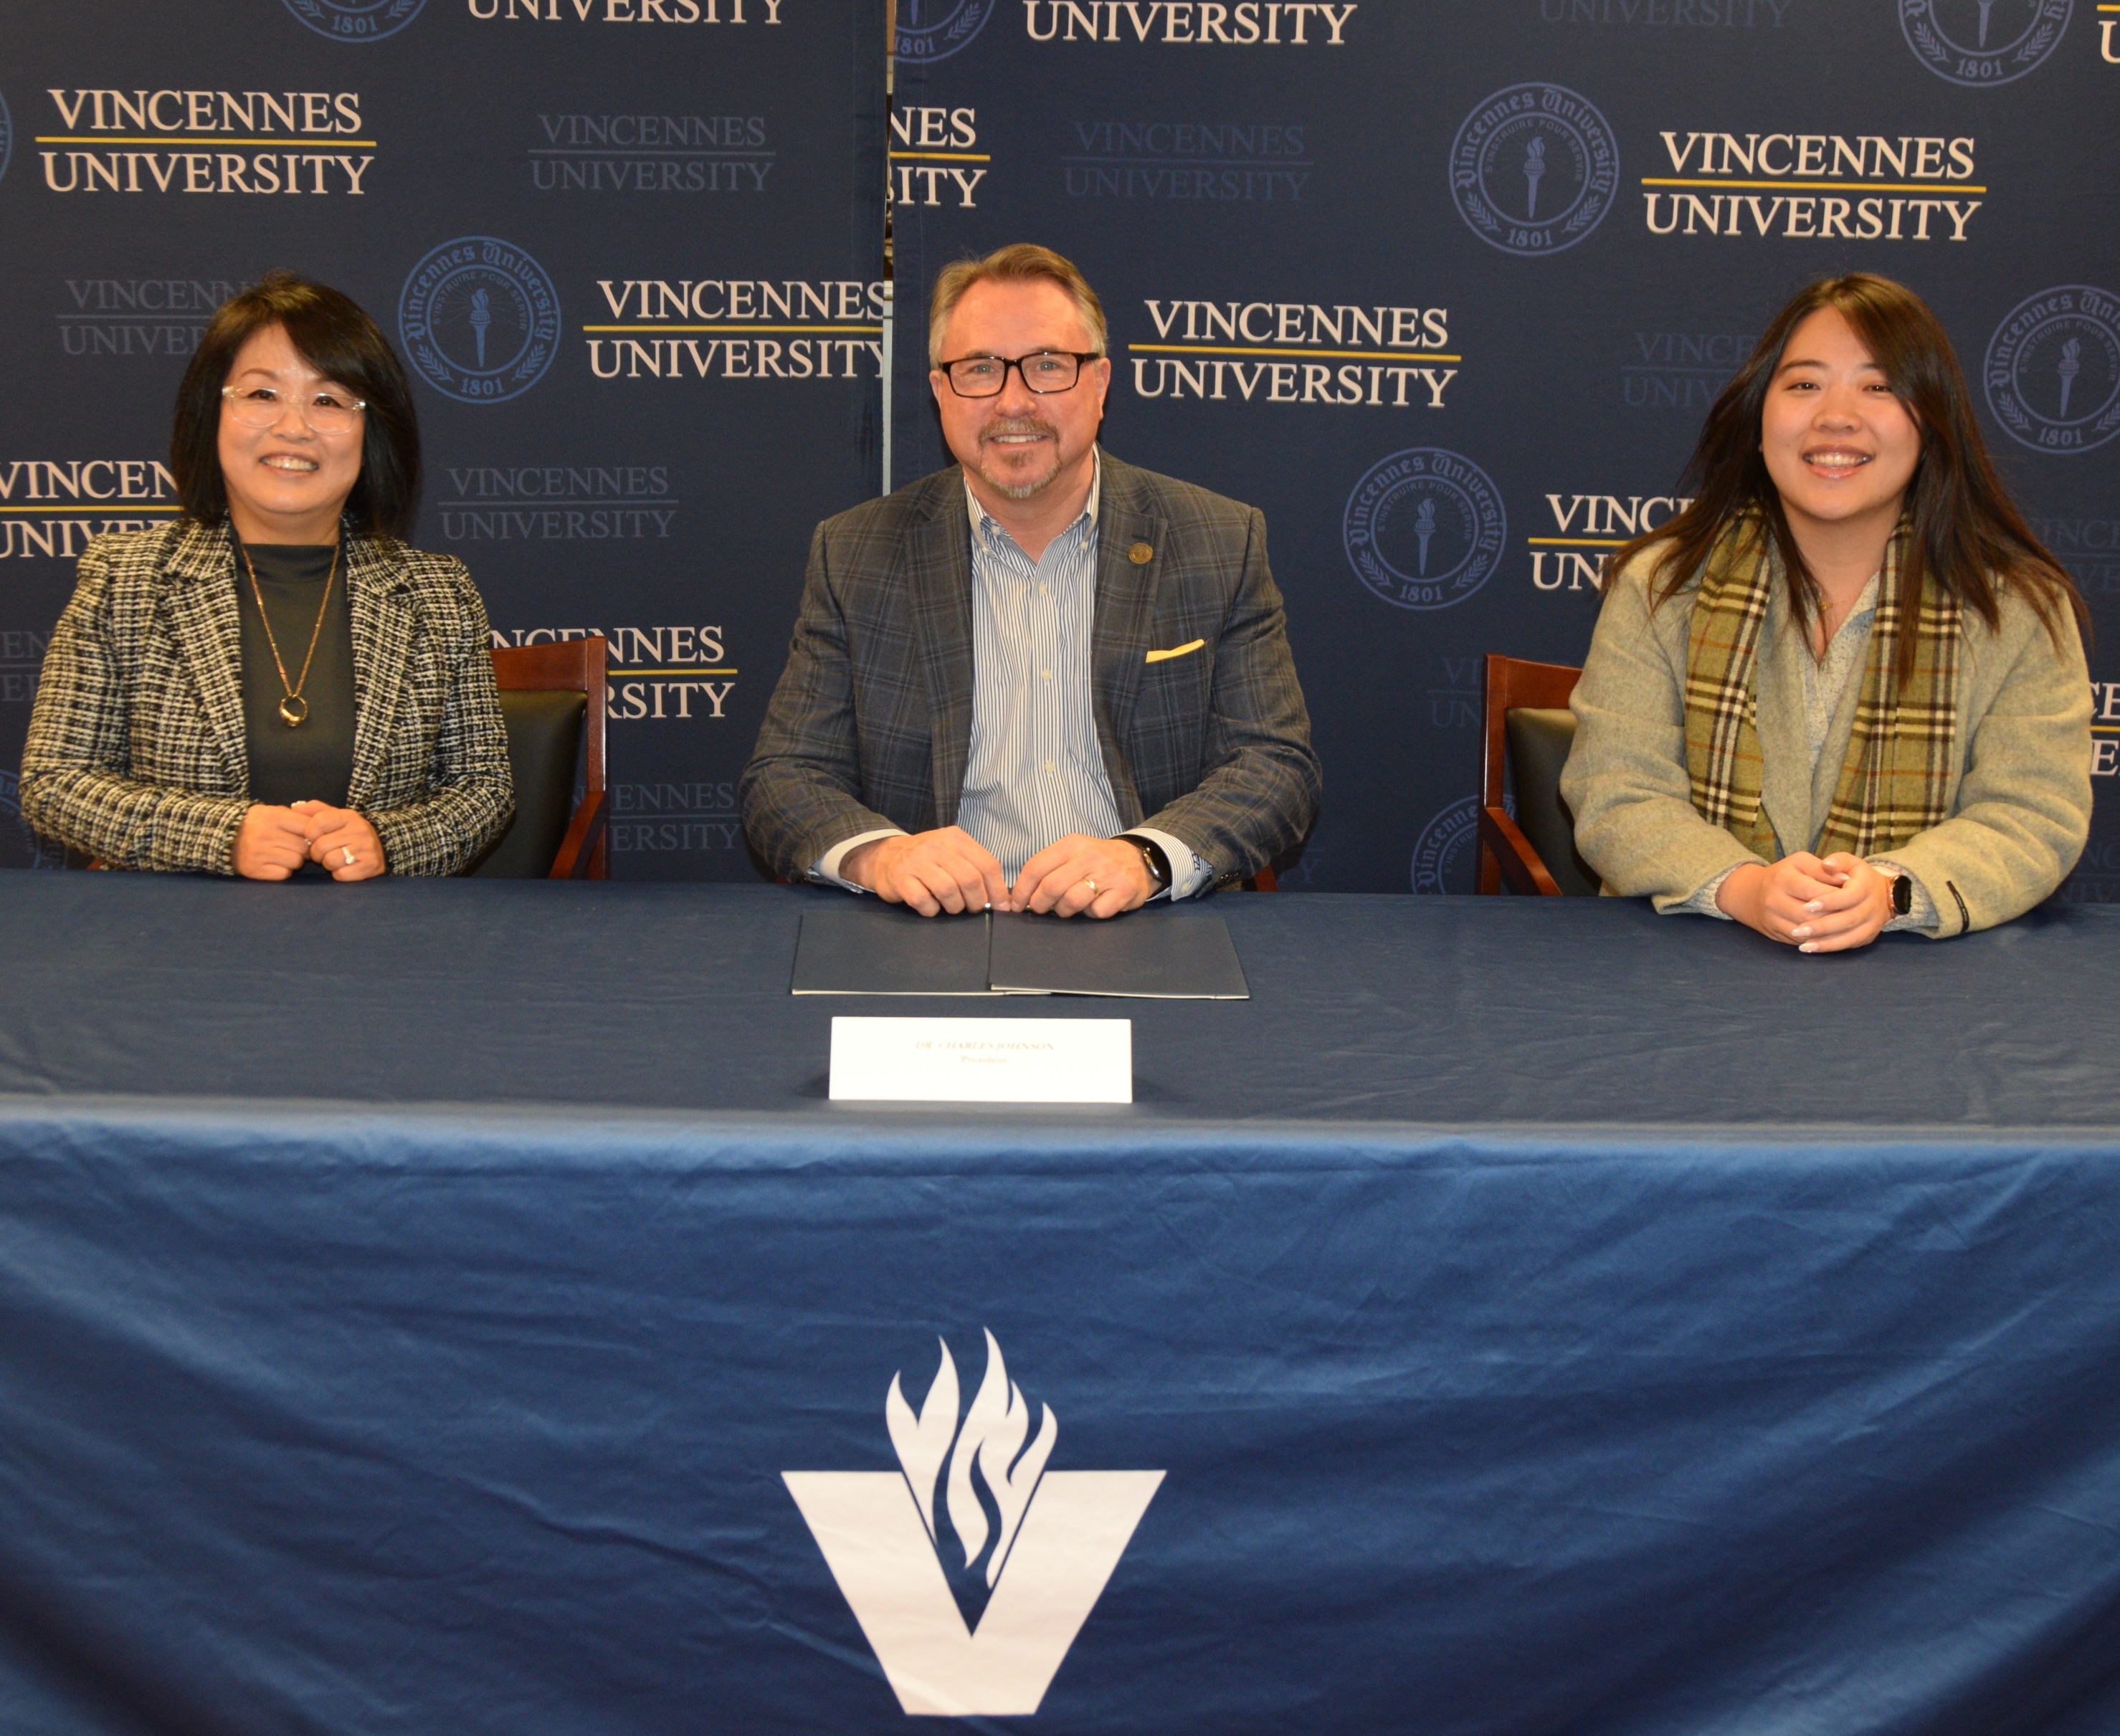 Dr. Elin Jung, Dr. Chuck Johnson and Esther Yoon during the signing of a MOU in the President's Office on the Vincennes Campus